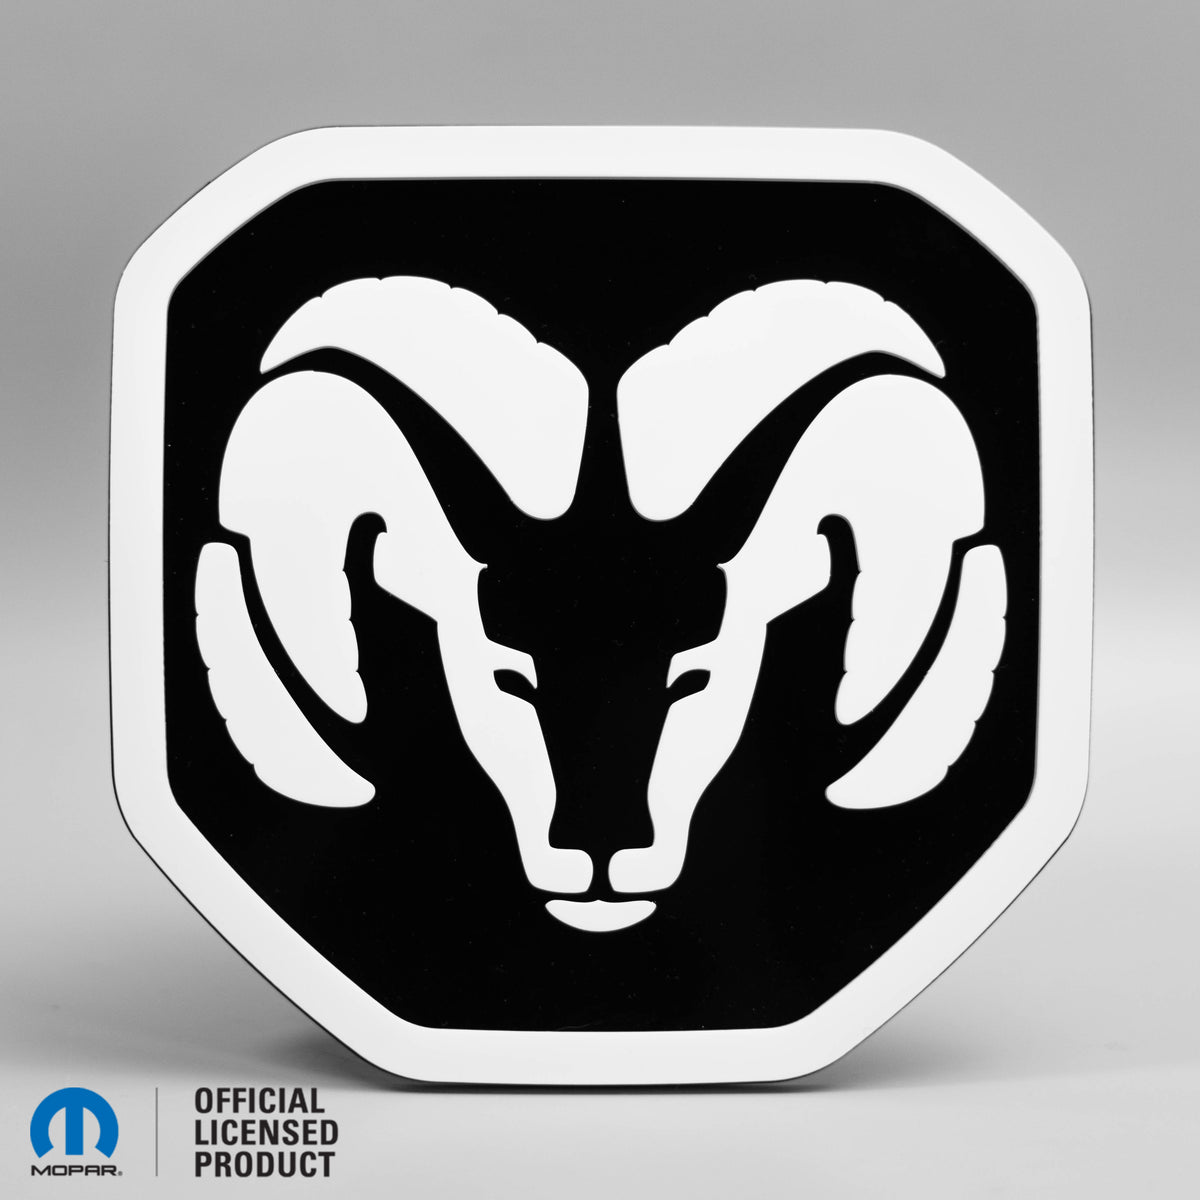 RAM® Head Logo Style 2 Tailgate Badge - Fits 2019+ RAM® Tailgate - 1500, 2500, 3500 - White on Gloss- Officially Licensed Product